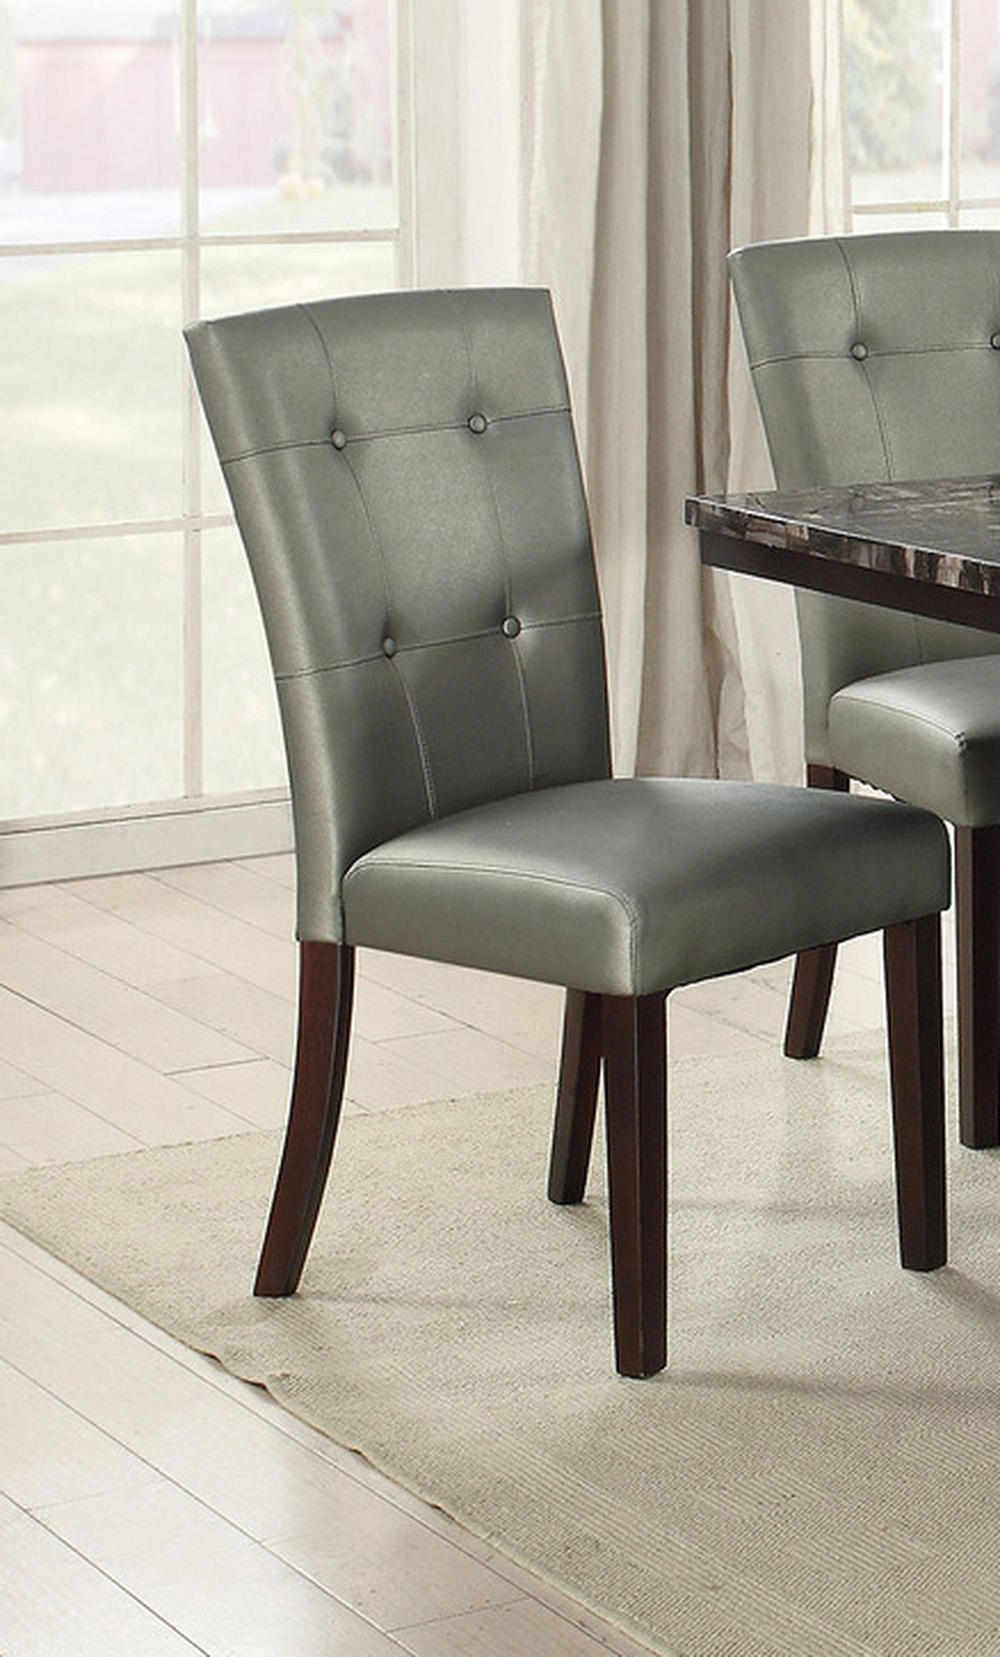 Faux Leather Upholstered Dining Chair Set of 2, with Tufted Backrest, and Wooden Legs, for Restaurant, Cafe, Tavern, Office, Living Room - Silver